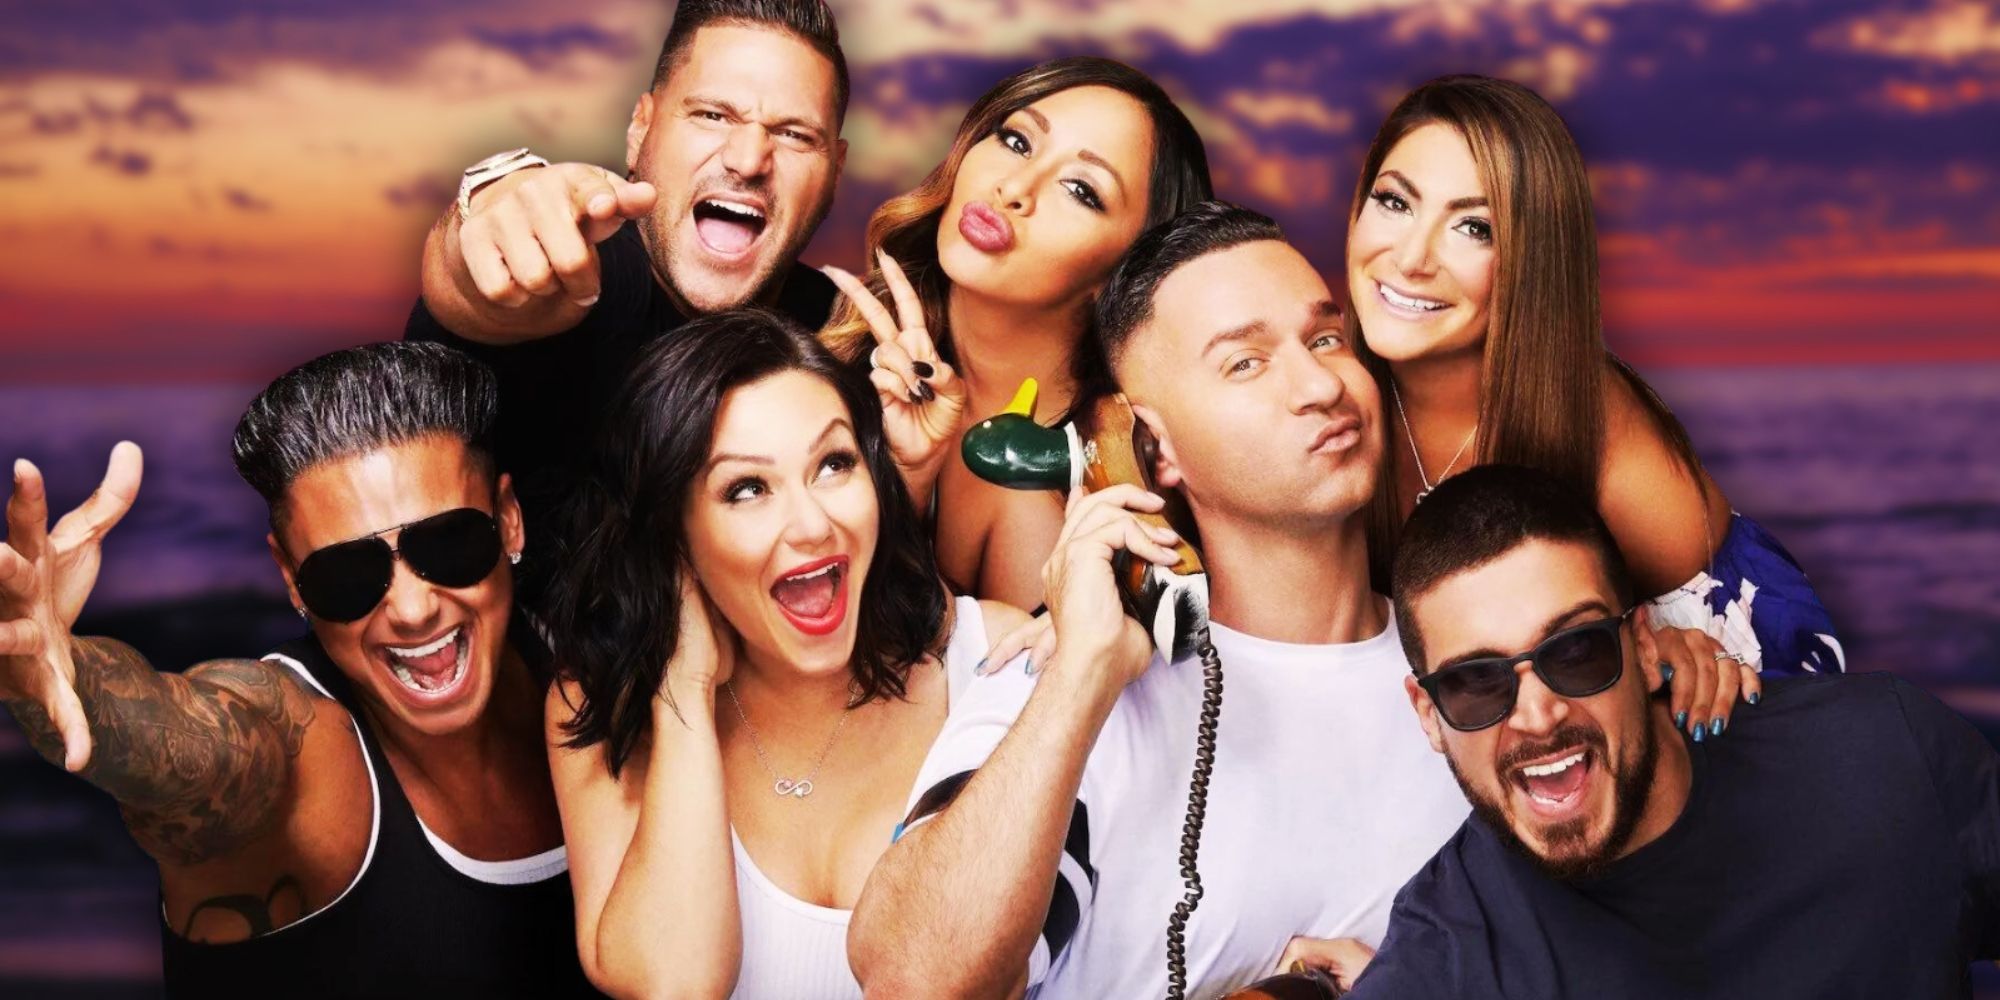 Jersey Shore Review: Where's the Beach? - TV Fanatic